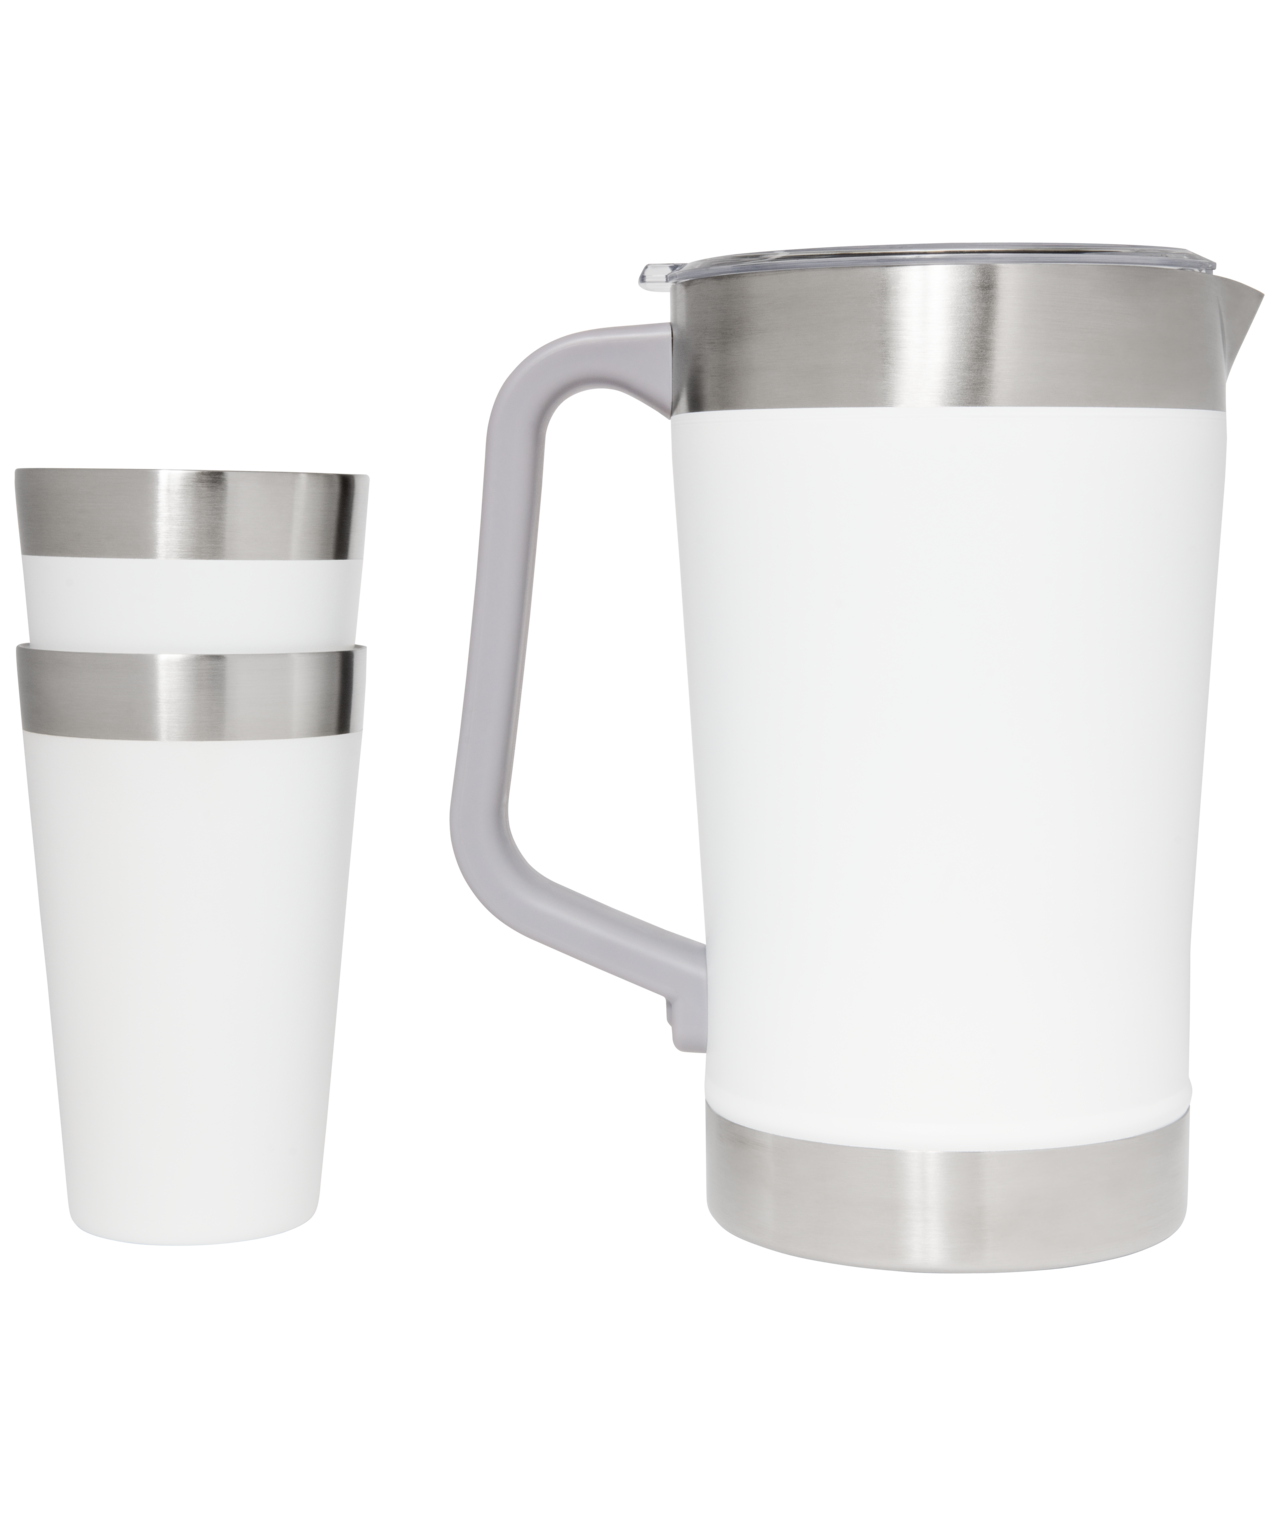 WORK 'n MORE - STANLEY CLASSIC STAY CHILL BEER PITCHER SET- POLAR